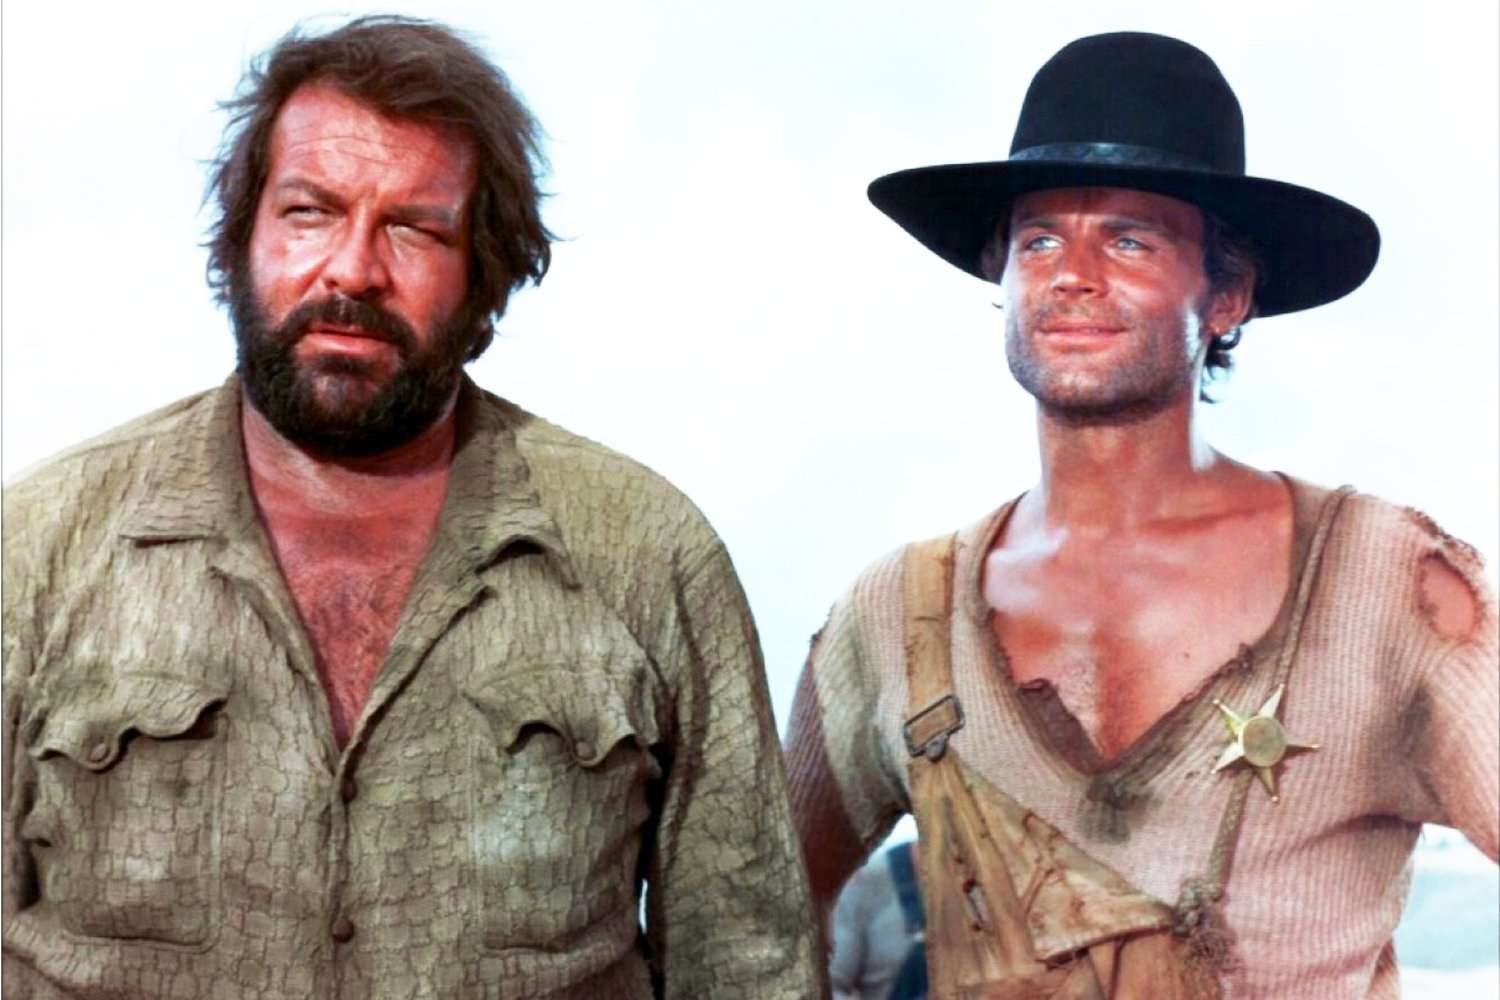 Spaghetti Western star Bud Spencer dies at age 86 | South China Morning Post